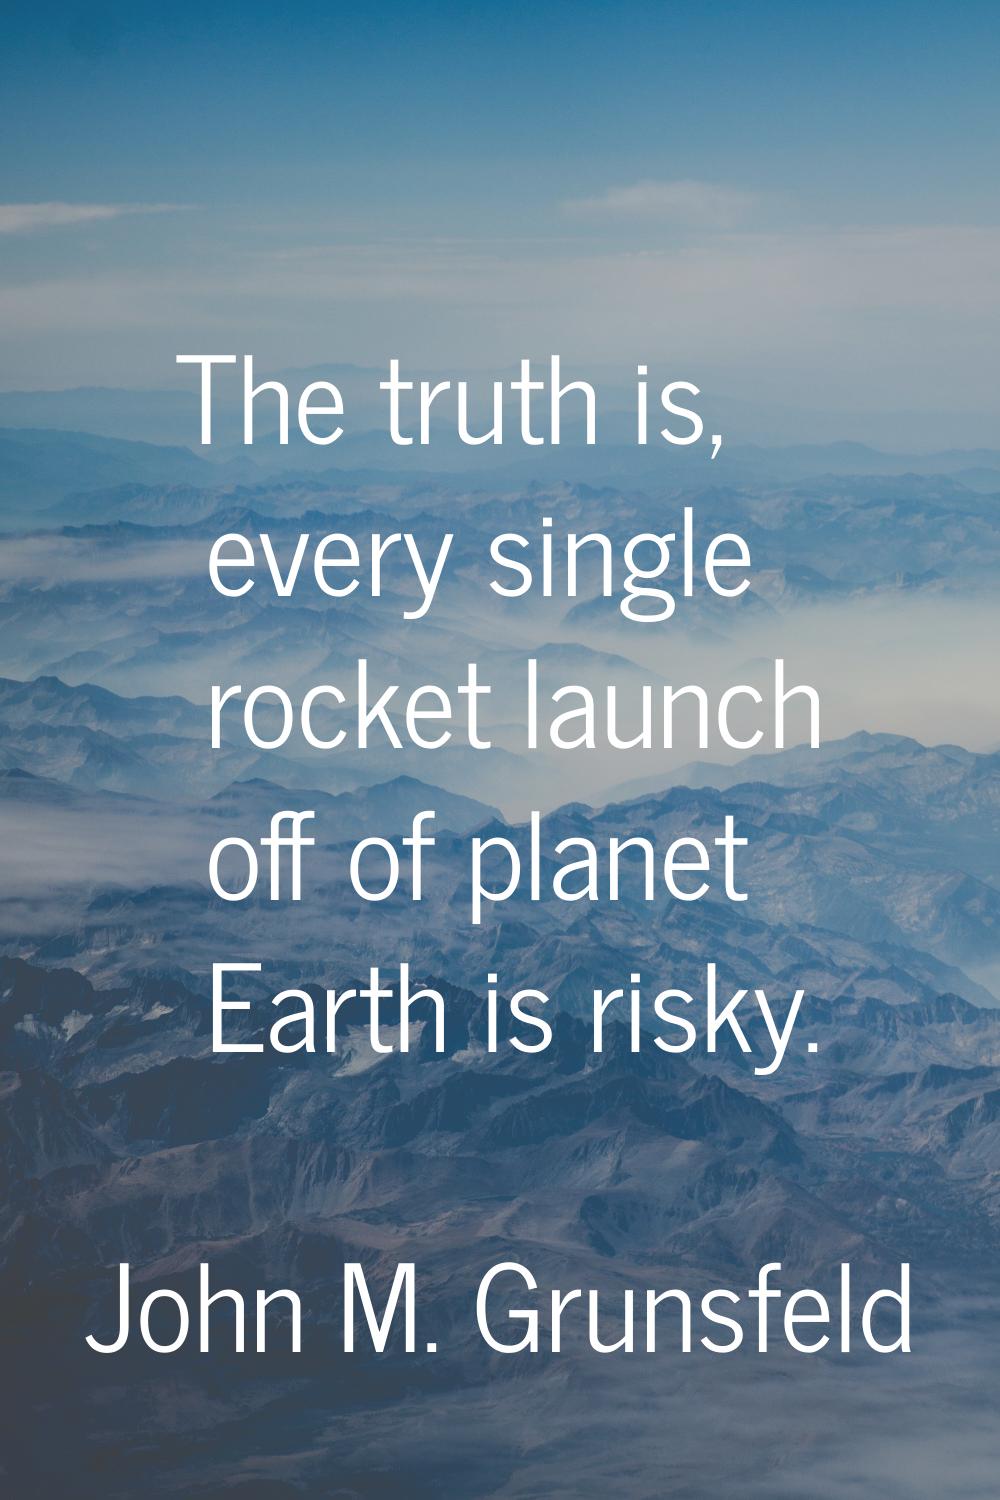 The truth is, every single rocket launch off of planet Earth is risky.